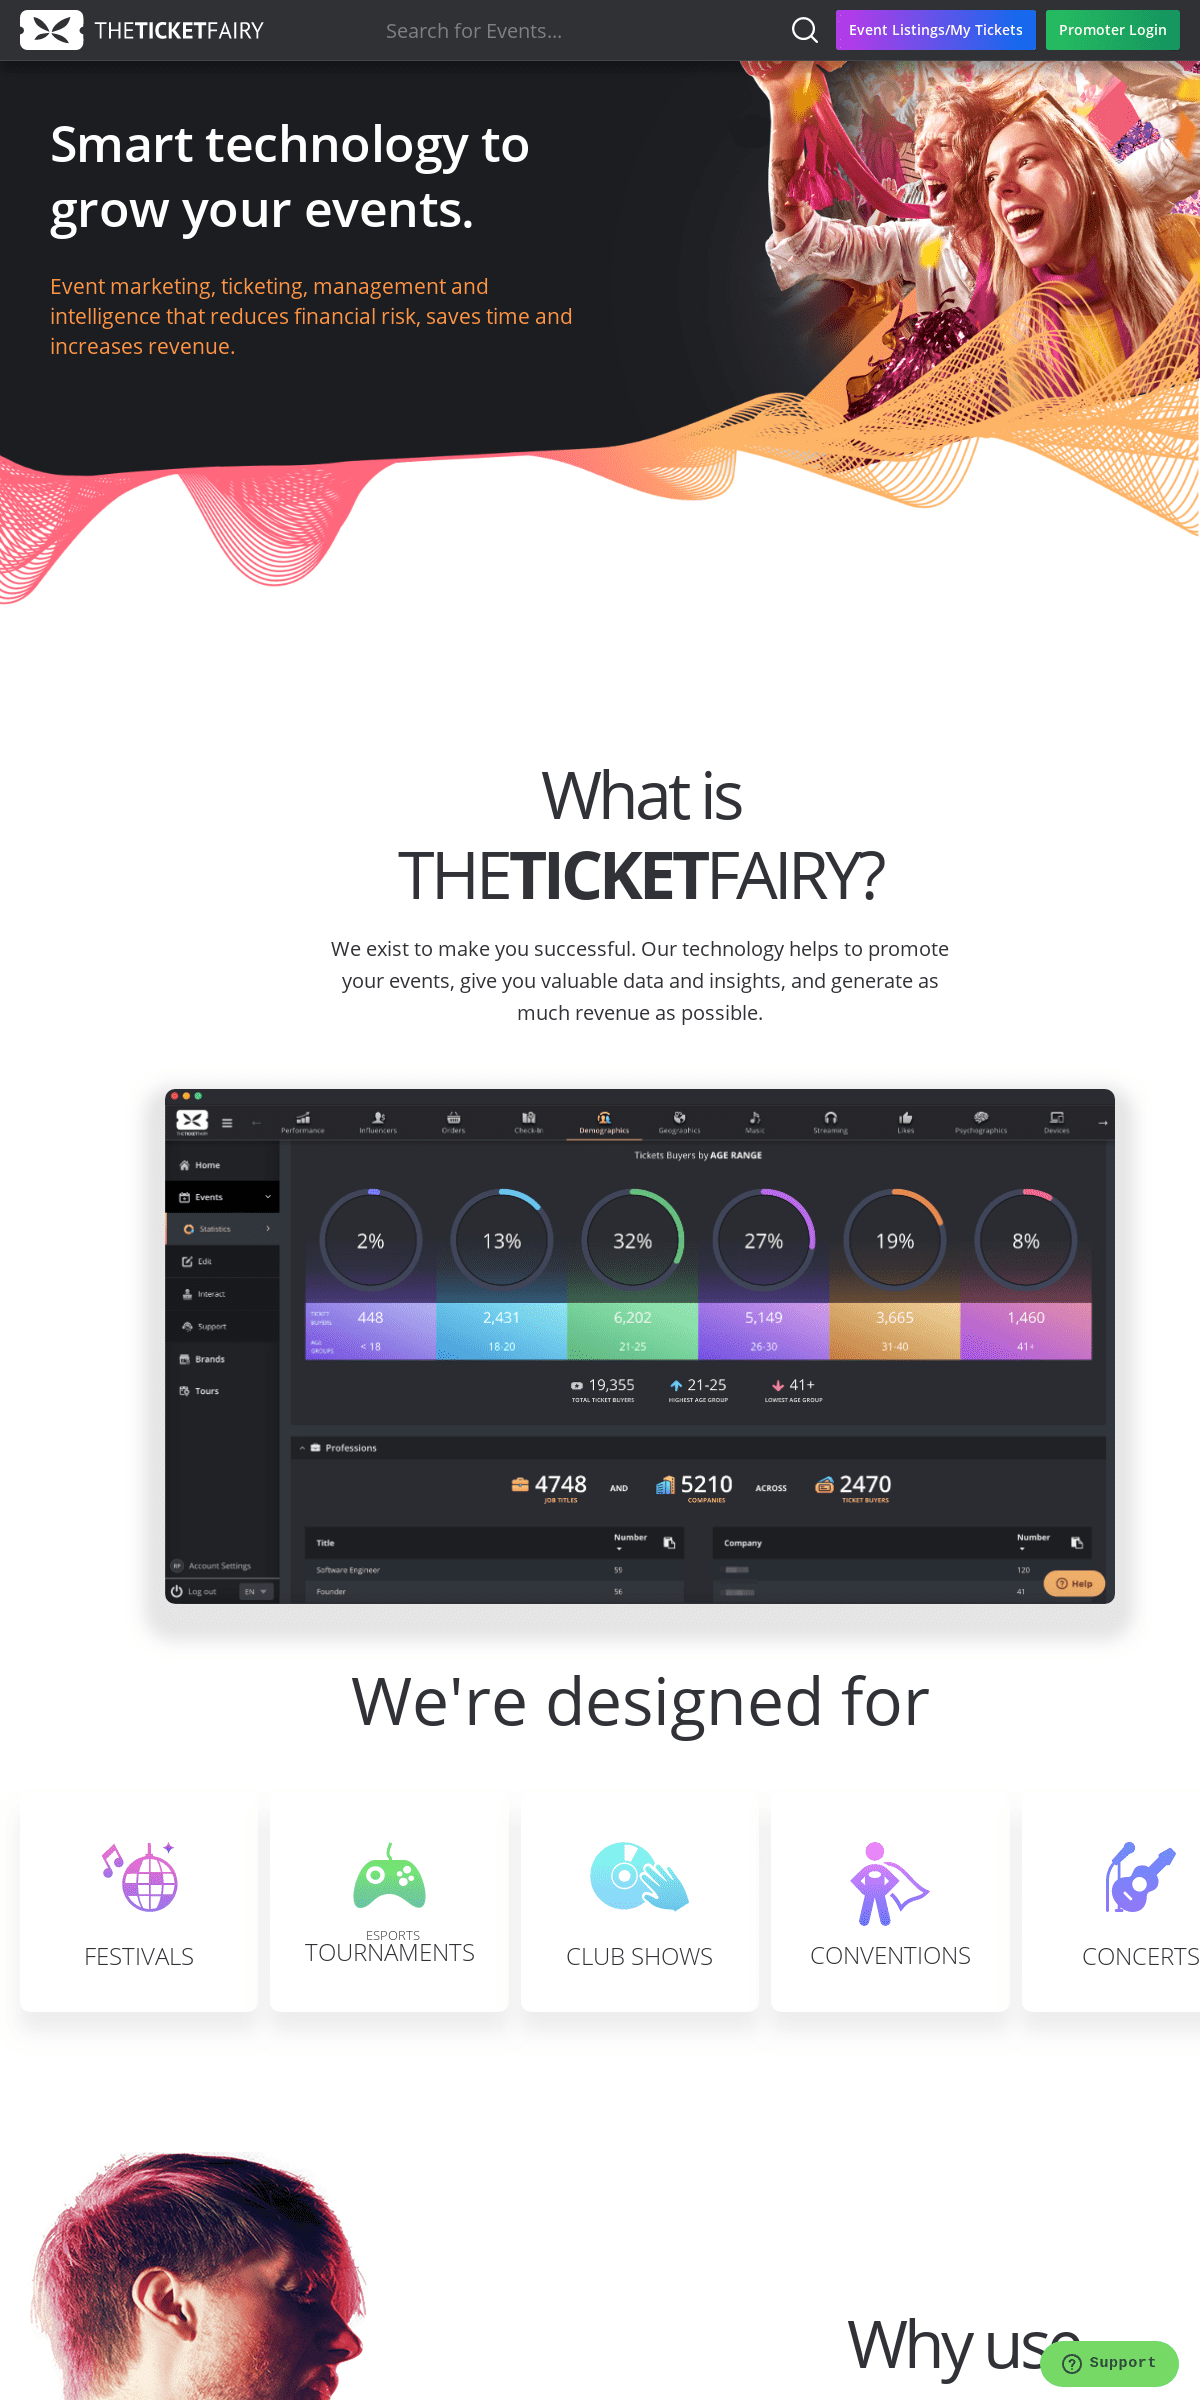 A complete backup of theticketfairy.com